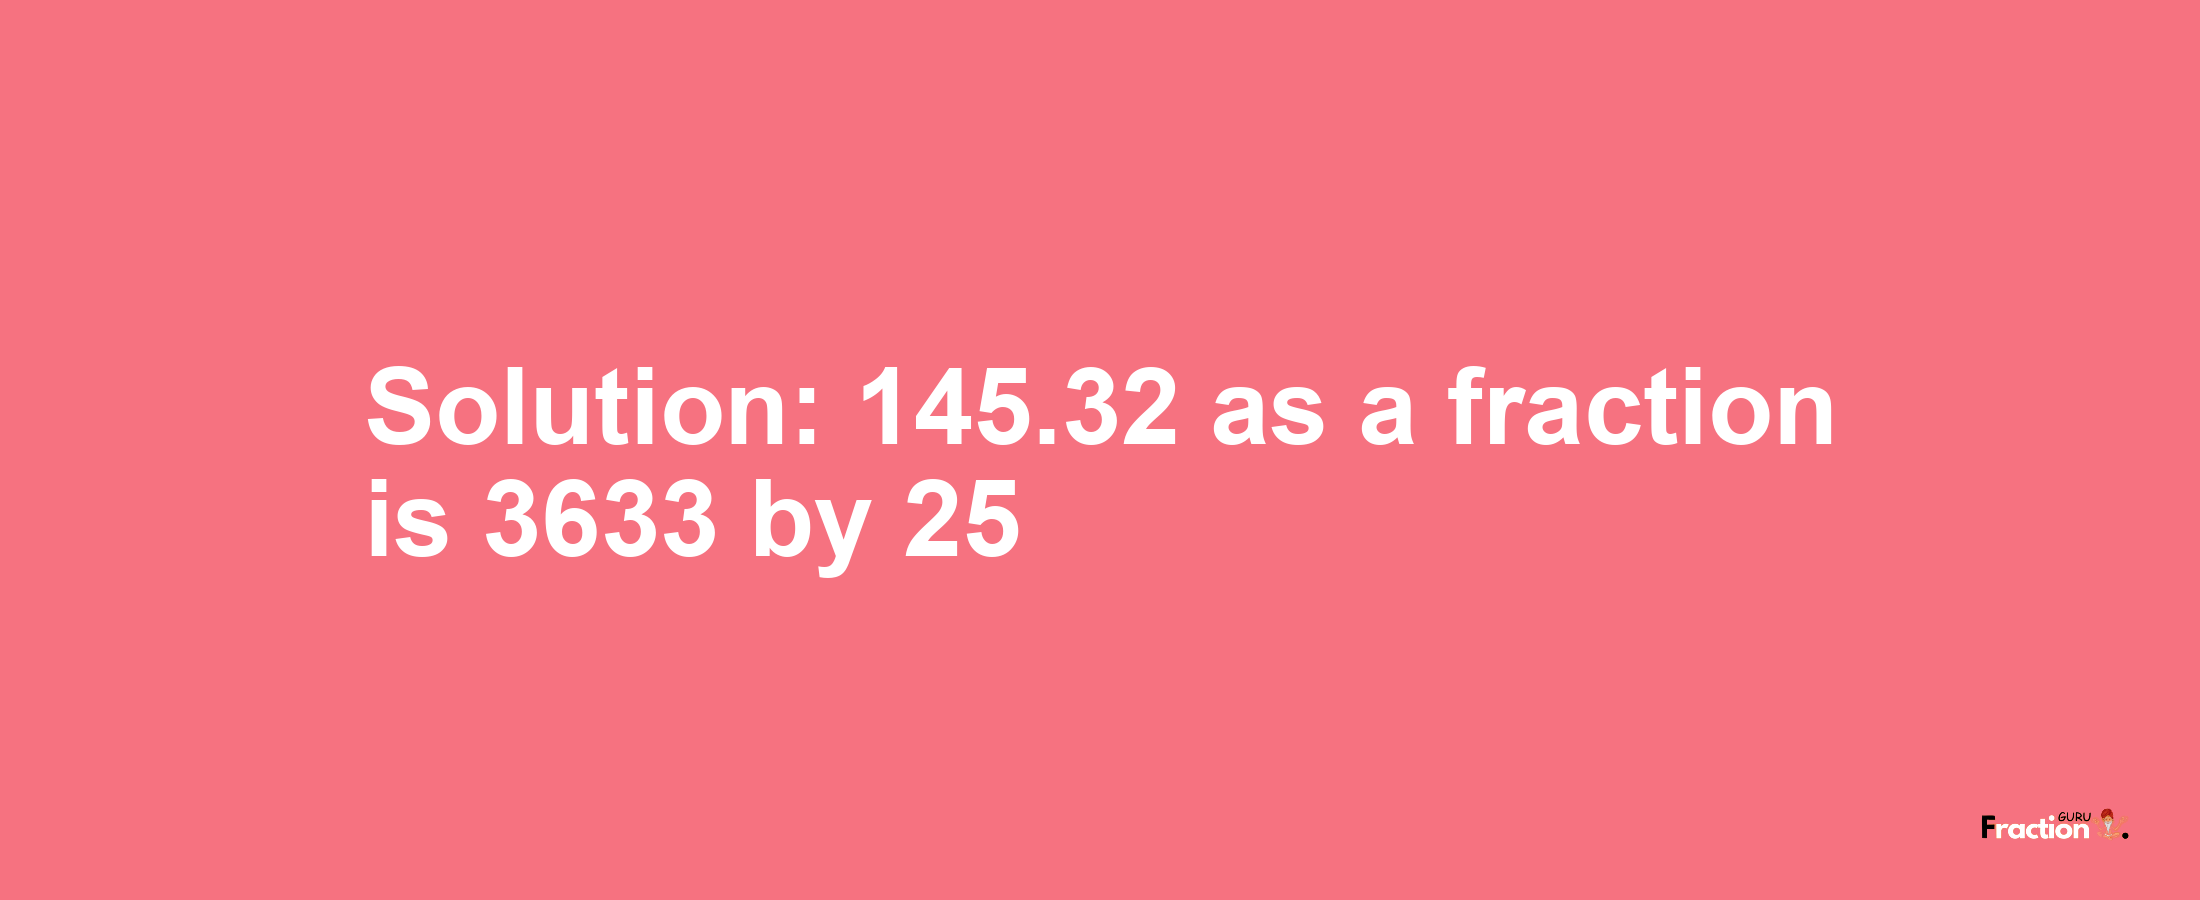 Solution:145.32 as a fraction is 3633/25